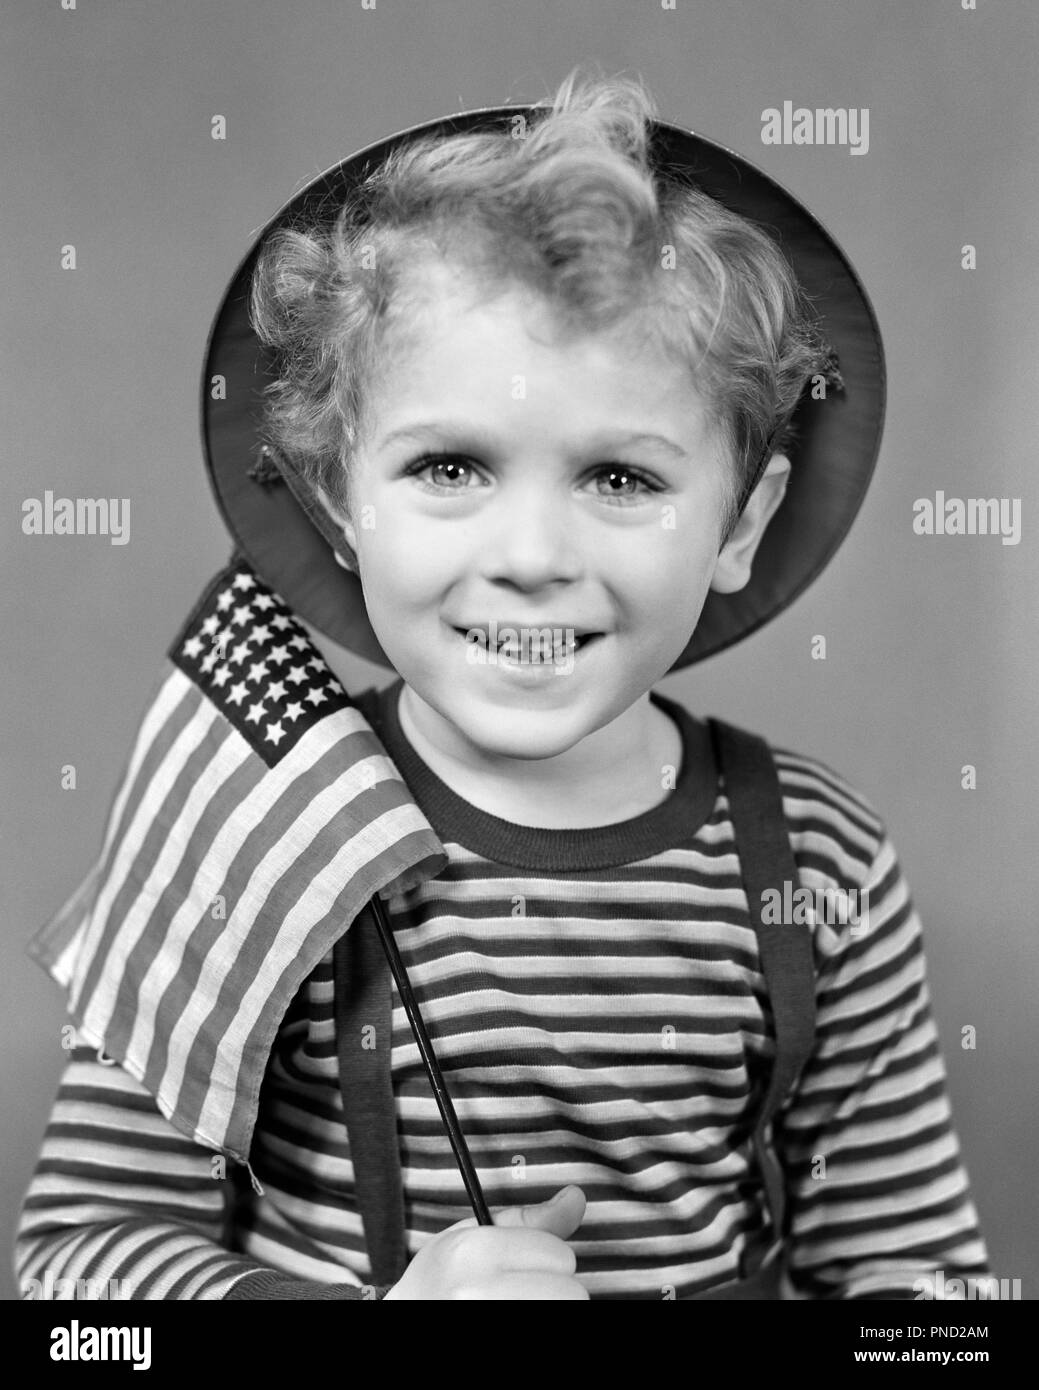 1940s SMILING CURLY HEADED BOY WEARING HAT &  STRIPED SHIRT AND HOLDING SMALL AMERICAN FLAG LOOKING AT CAMERA  - j8962 HAR001 HARS HOME LIFE UNITED STATES COPY SPACE HALF-LENGTH INSPIRATION UNITED STATES OF AMERICA MALES CONFIDENCE B&W EYE CONTACT FREEDOM HAPPINESS CHEERFUL AND WORLD WARS CURLY PRIDE WORLD WAR WORLD WAR TWO WORLD WAR II POLITICS SMILES JOYFUL PATRIOTIC STARS AND STRIPES WORLD WAR 2 48 STAR IDEAS JUVENILES RED WHITE AND BLUE STARS AND STRIPS BLACK AND WHITE CAUCASIAN ETHNICITY HAR001 HEADED OLD FASHIONED Stock Photo